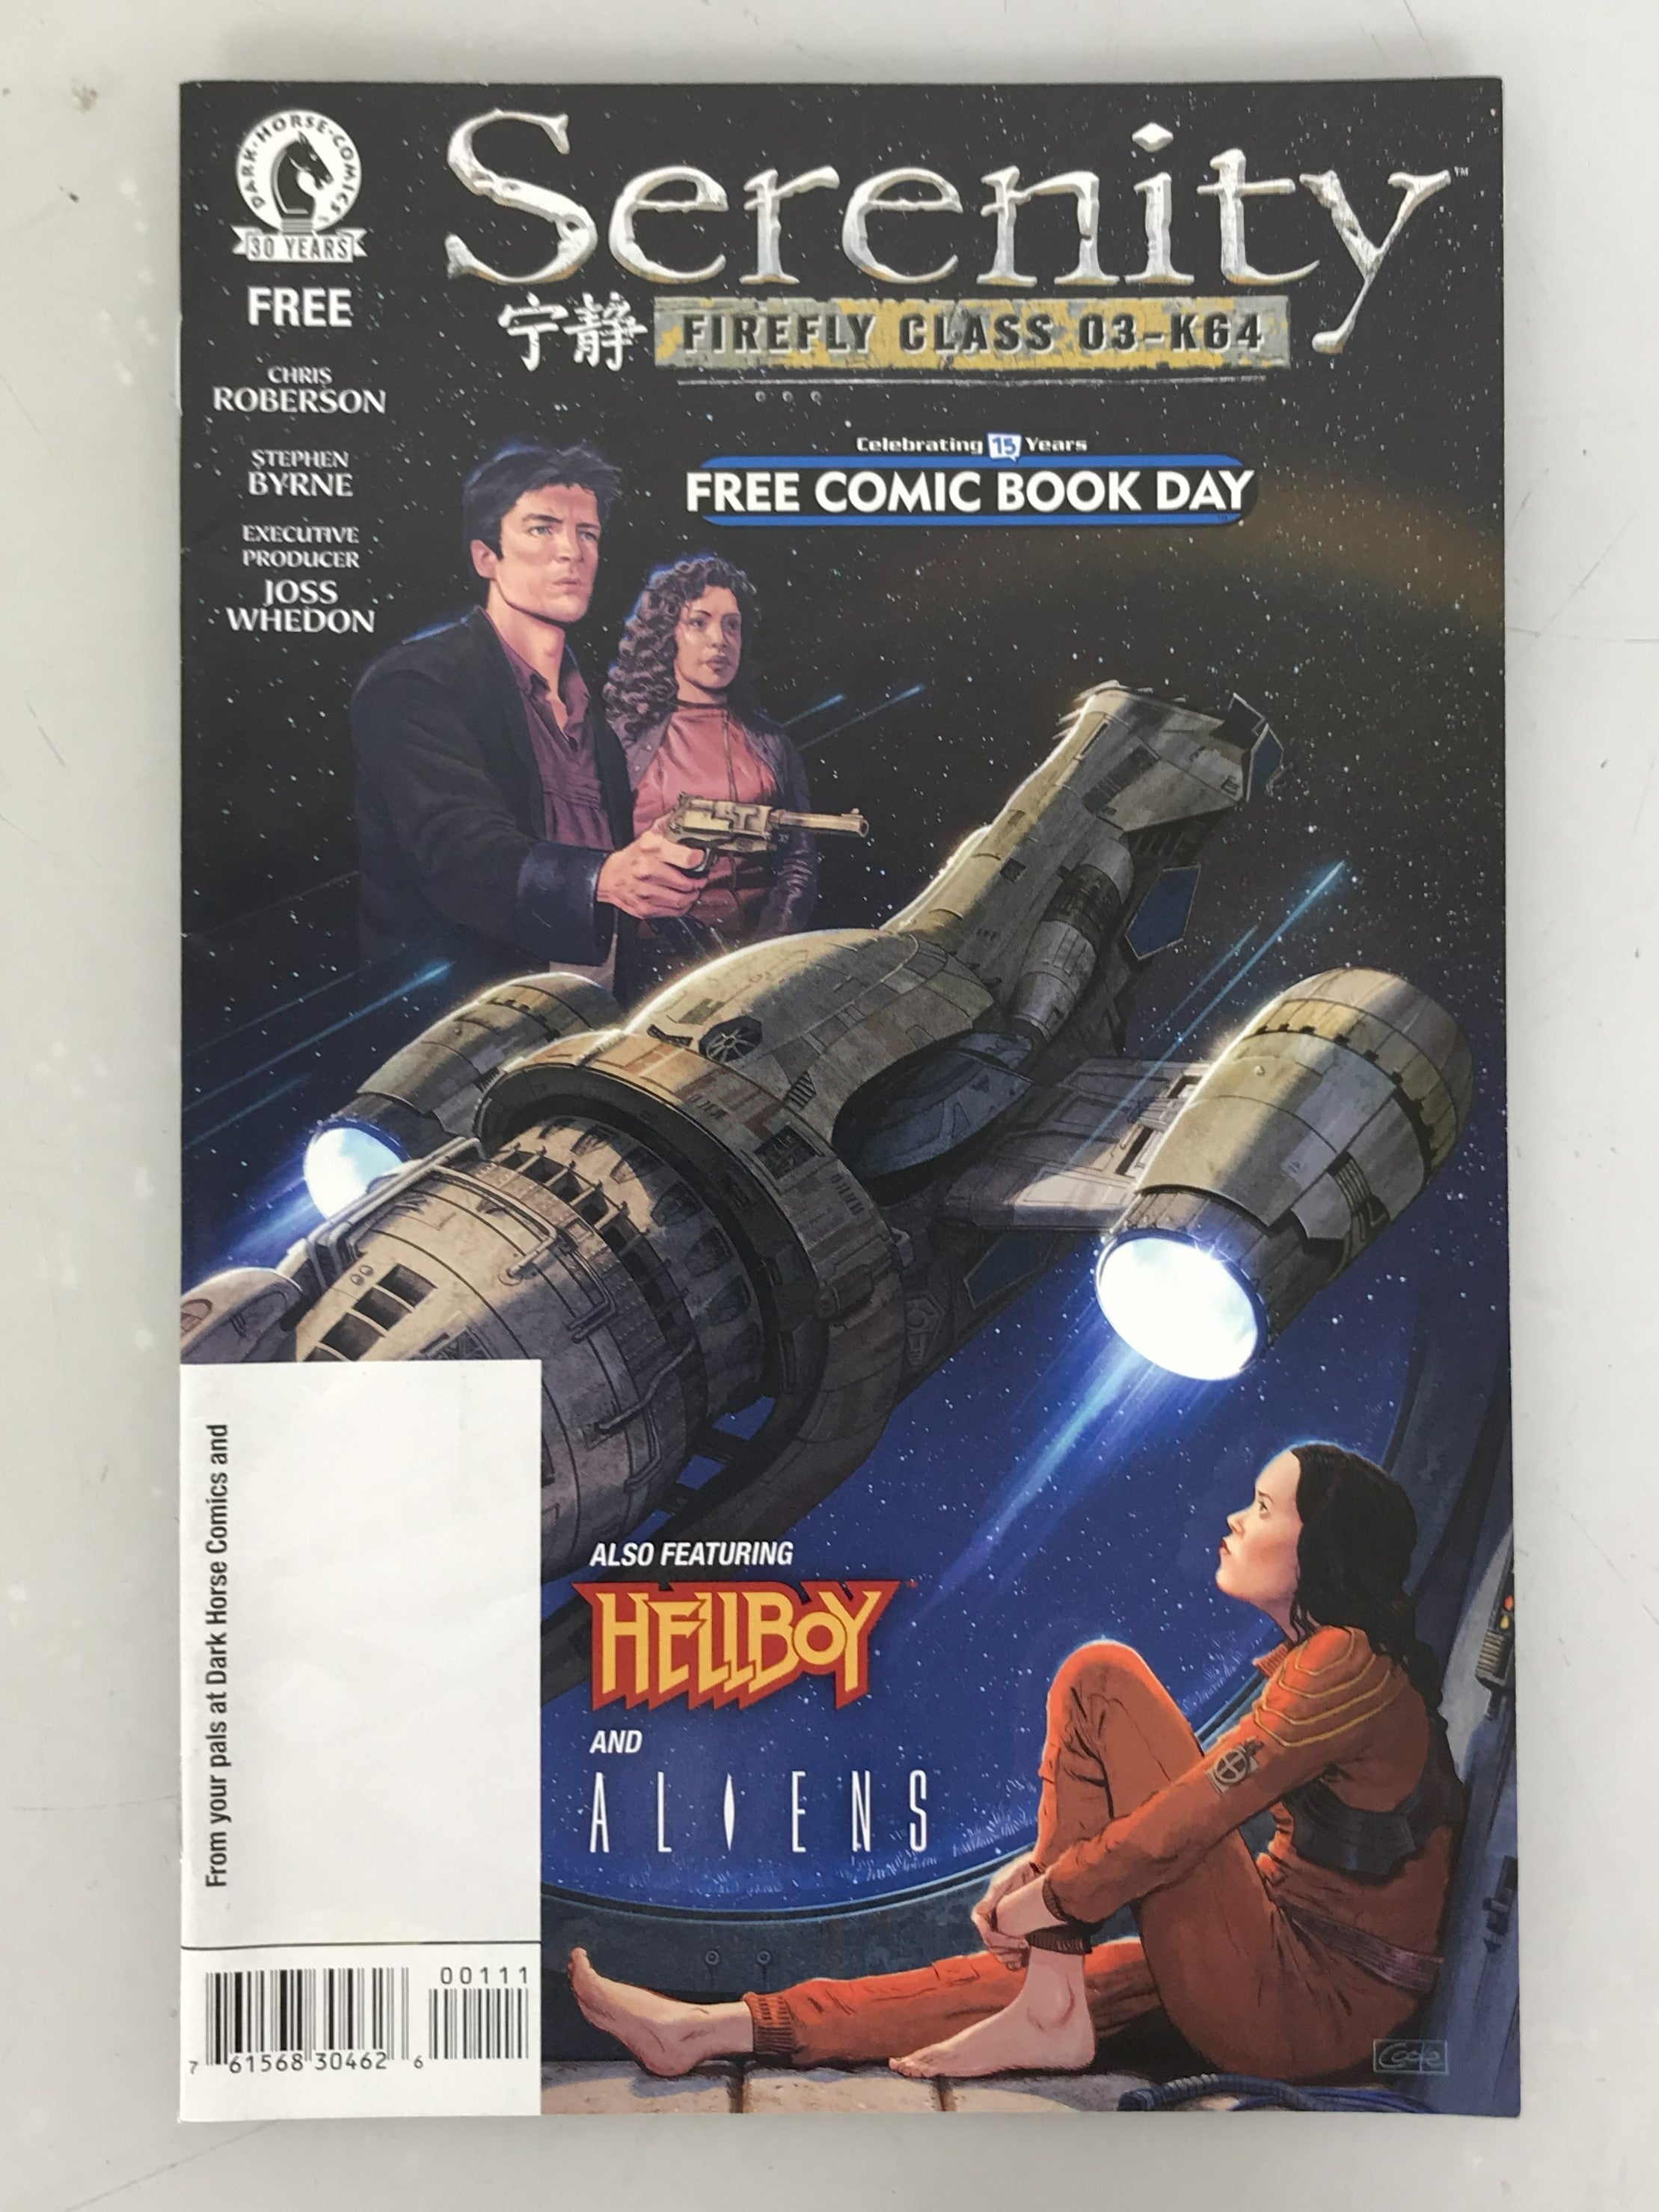 Serenity: Firefly Class 03-K64 Free Comic Book Day 2016